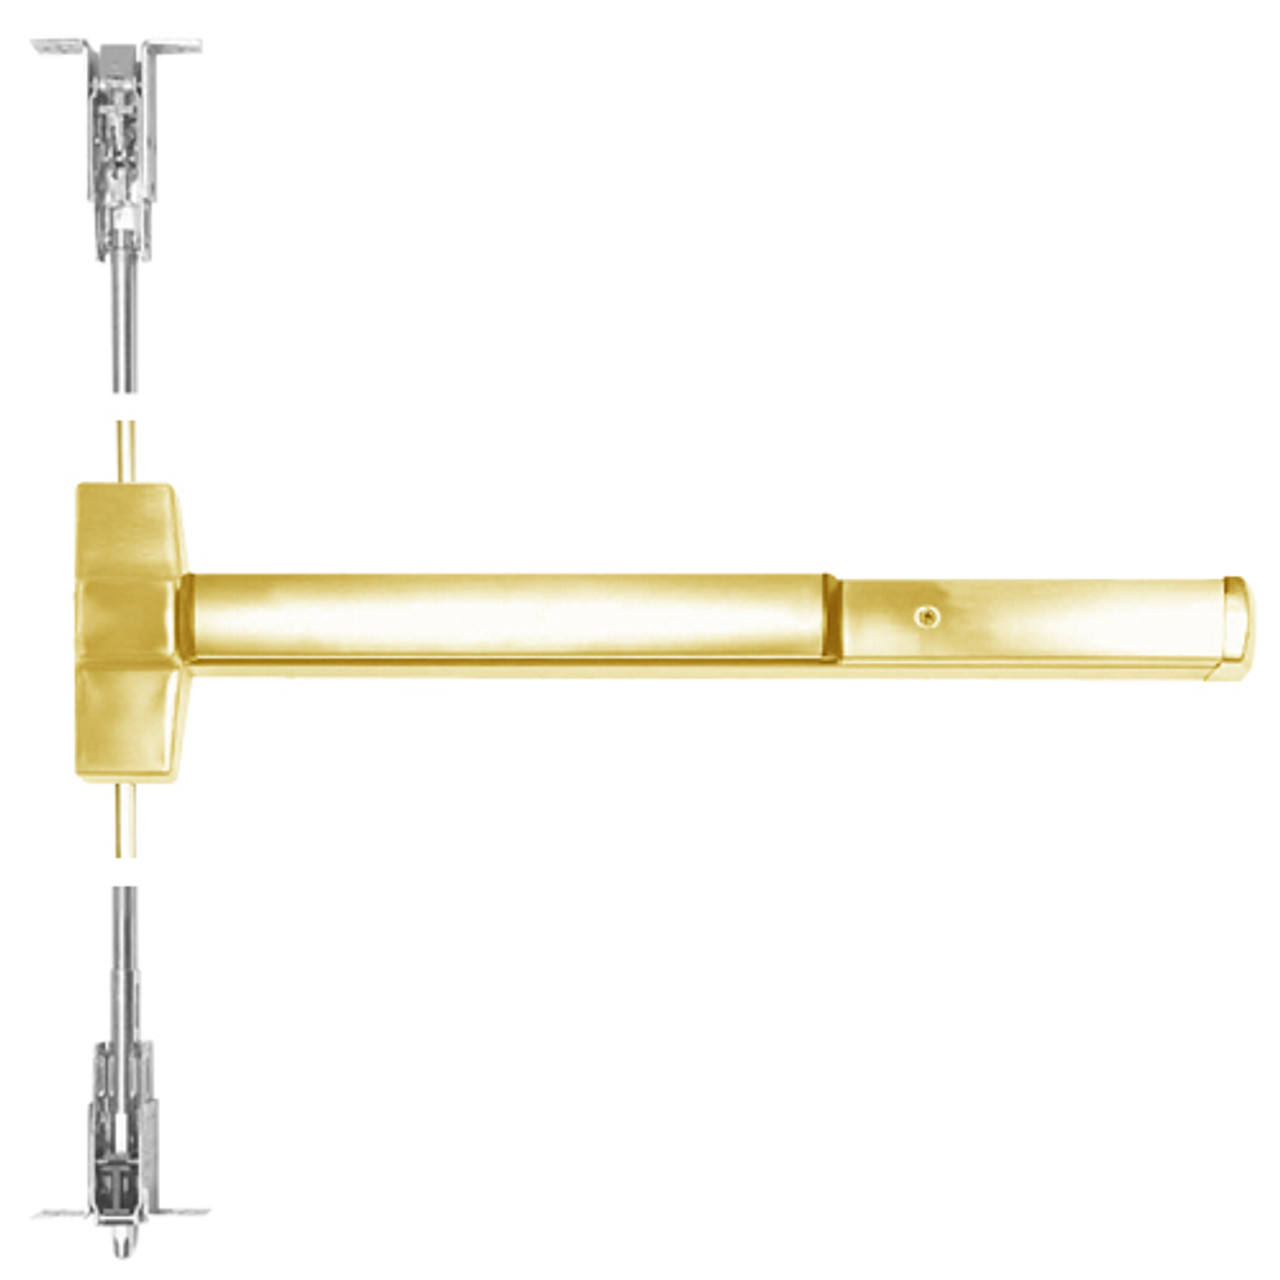 ED5800-605-W048-MELR Corbin ED5800 Series Non Fire Rated Concealed Vertical Rod Device with Motor Latch Retraction in Bright Brass Finish